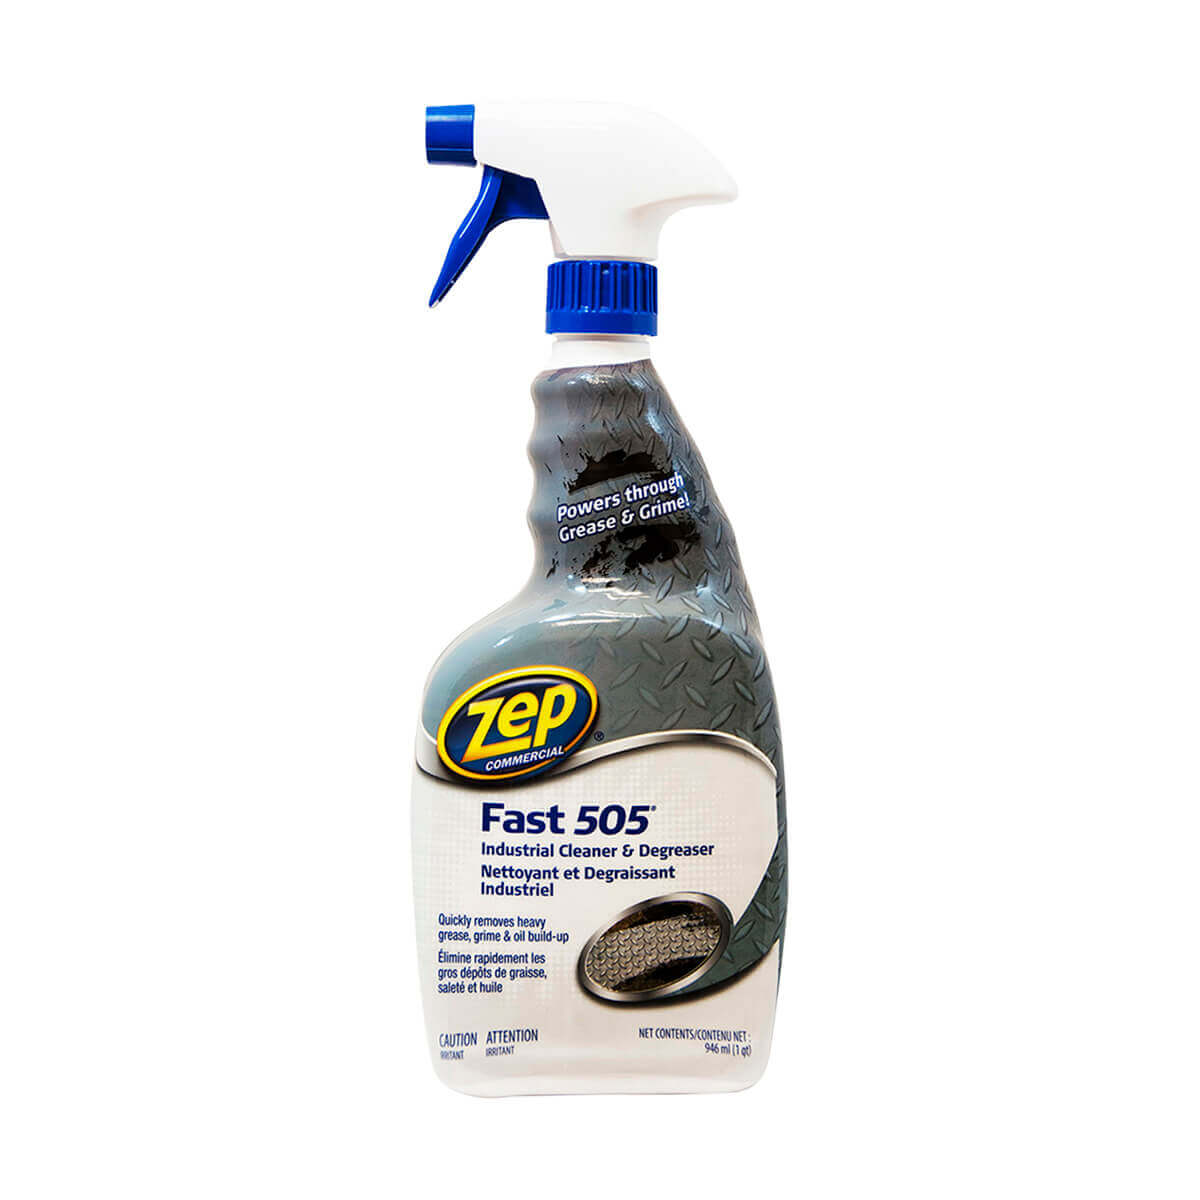 Zep Commercial Fast 505 Industrial Cleaner & Degreaser - 946 ml